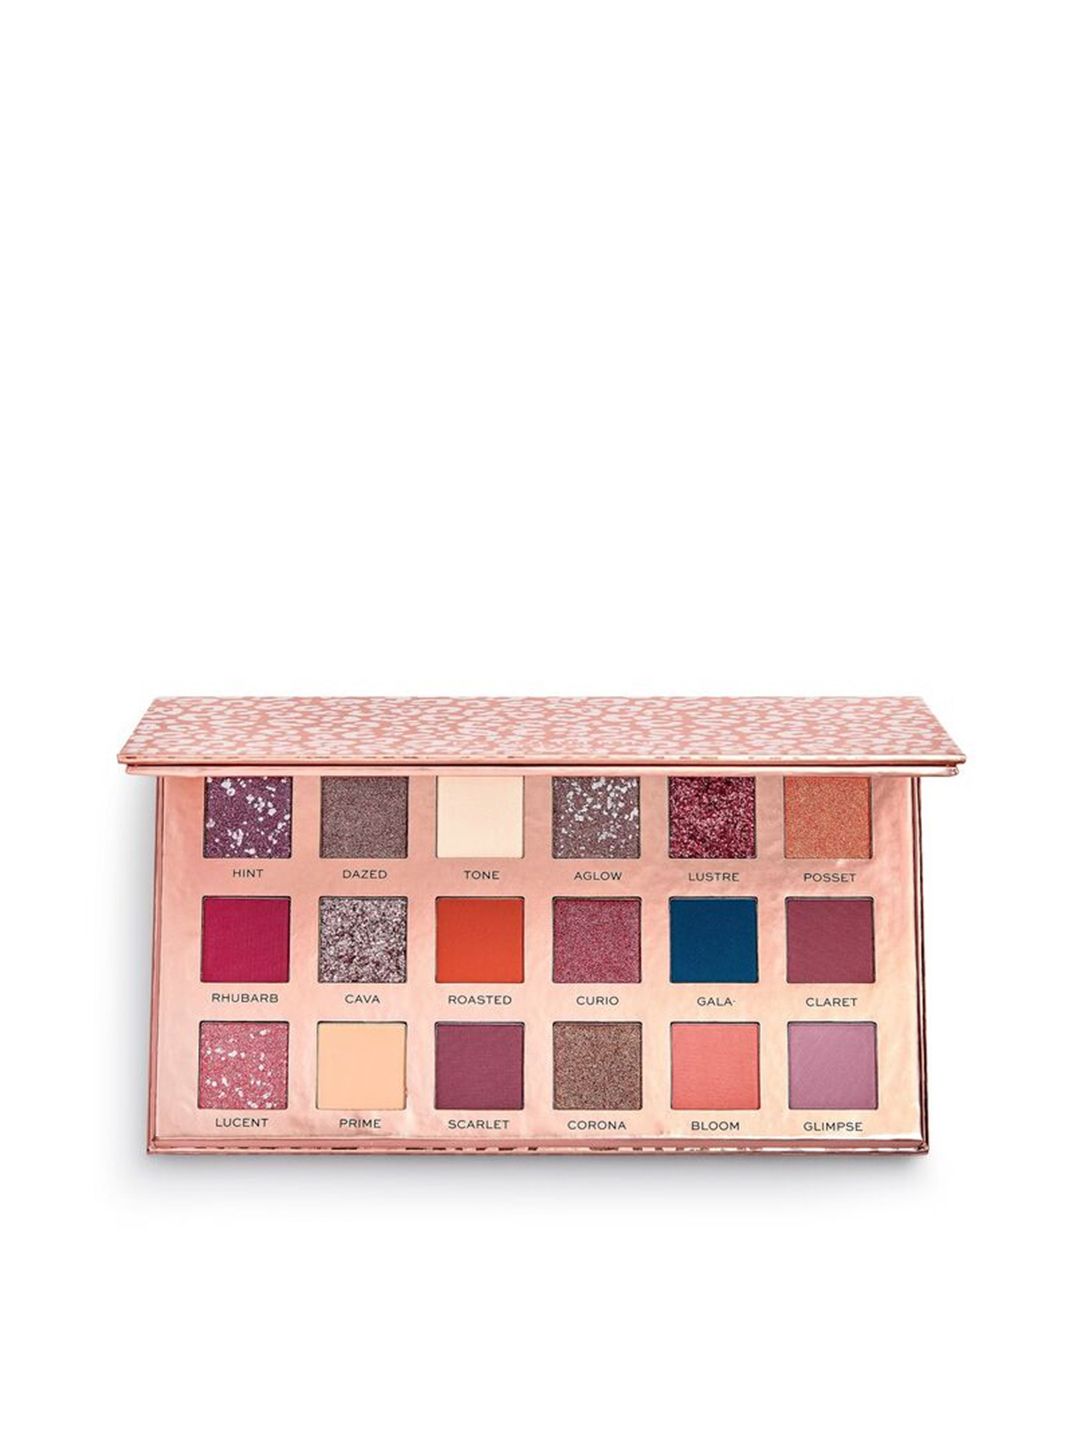 Makeup Revolution London Pro New Neutral Blushed Eyeshadow Palette Price in India